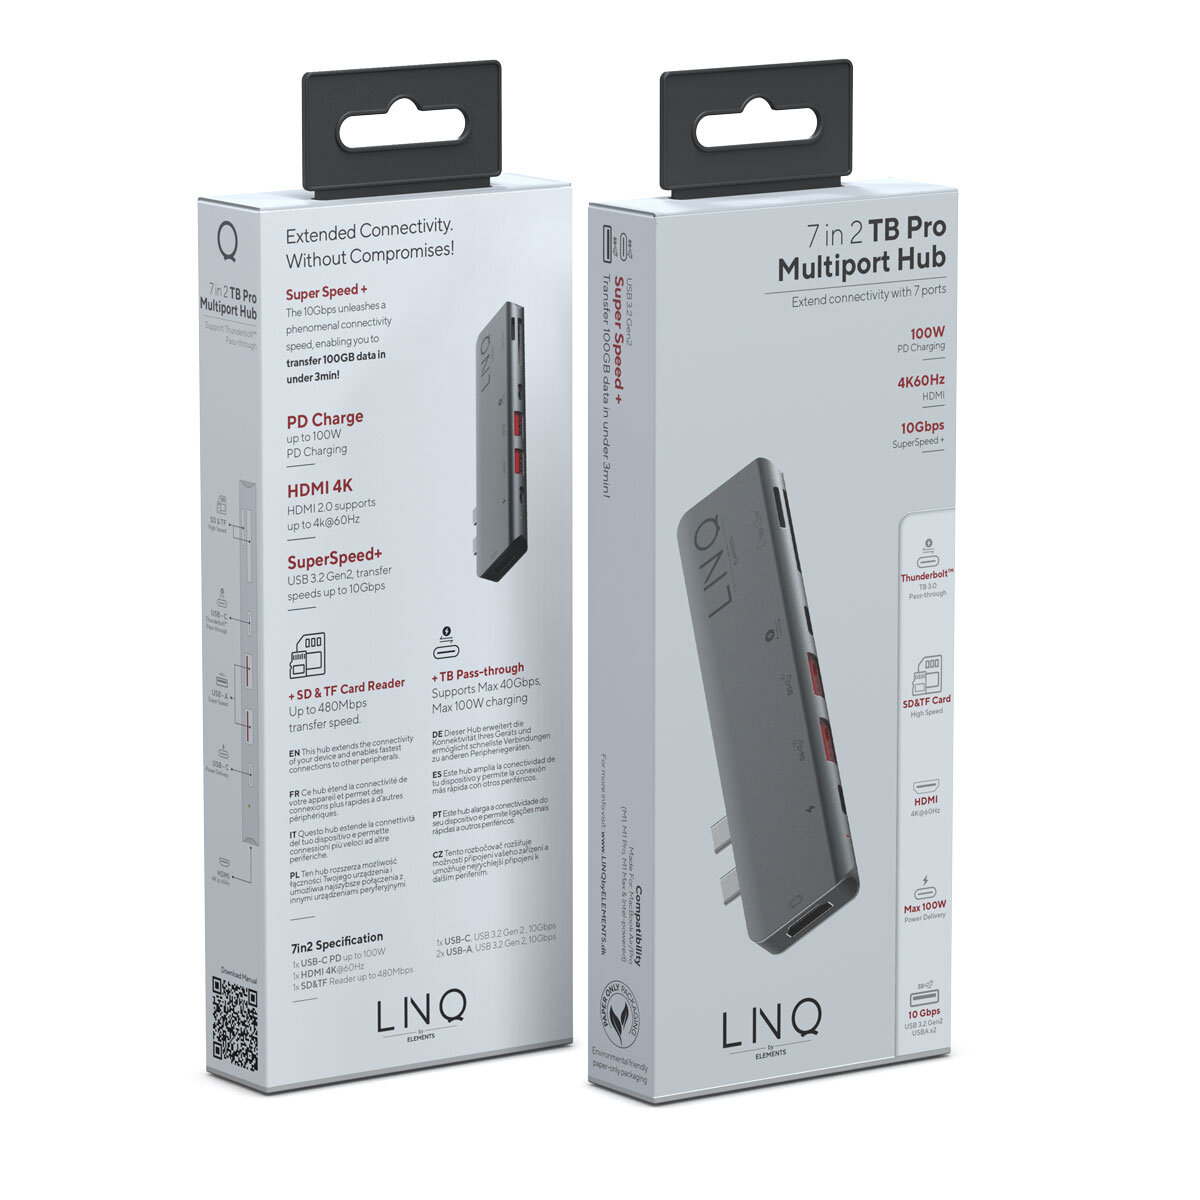 Packaging for LINQ 7in2 PRO USB-C Macbook® TB Multiport Hub